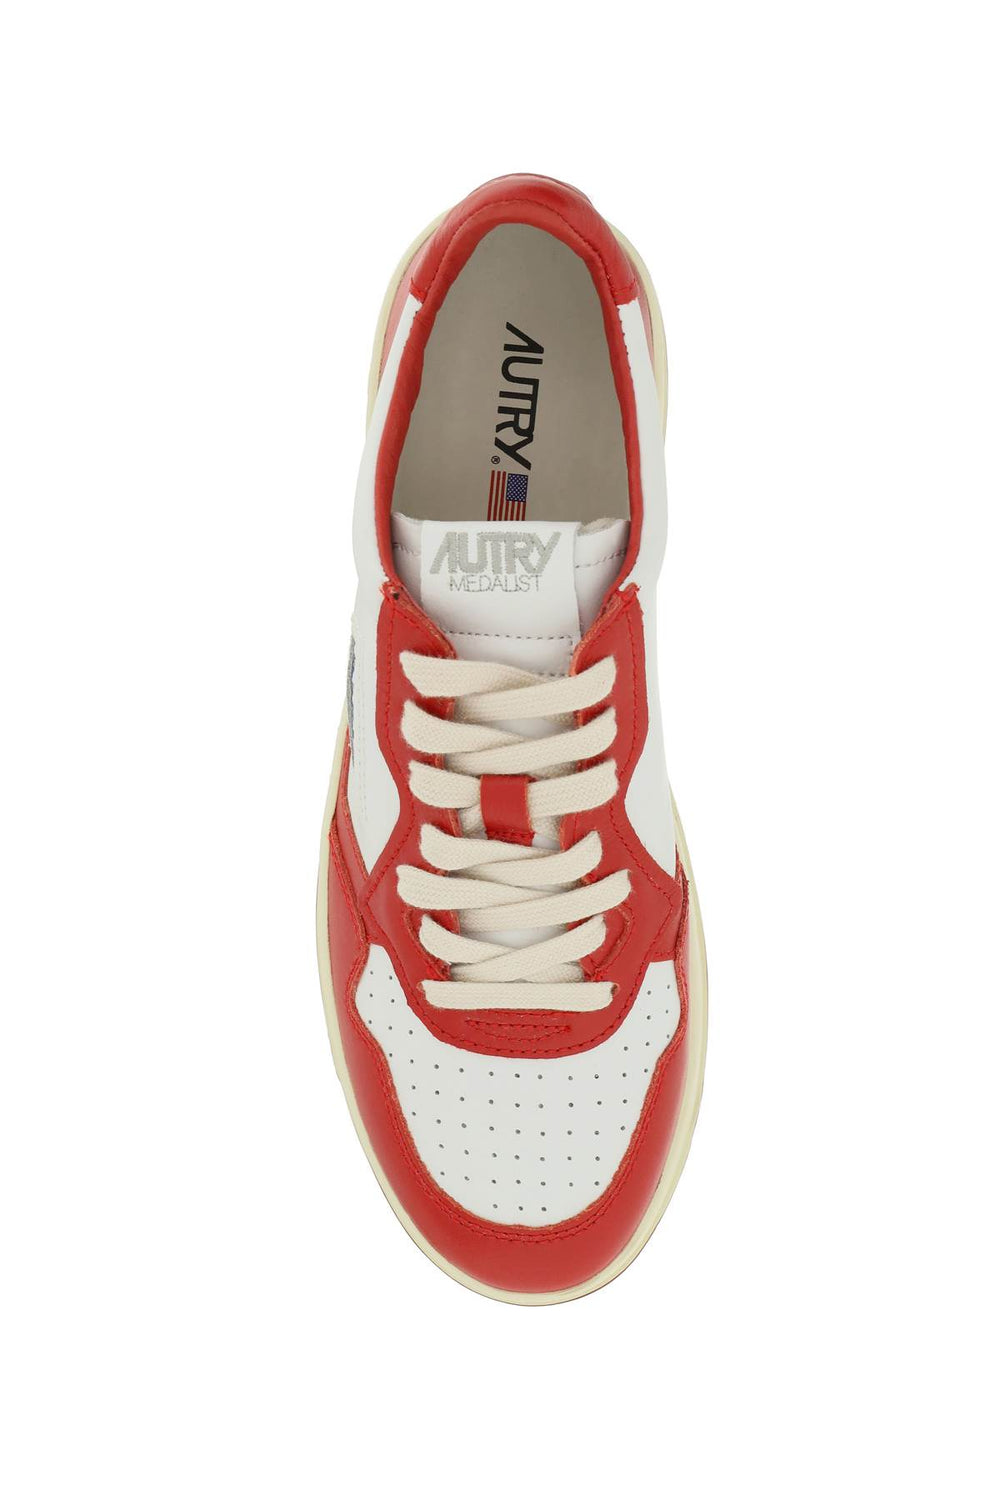 leather medalist low sneakers-1